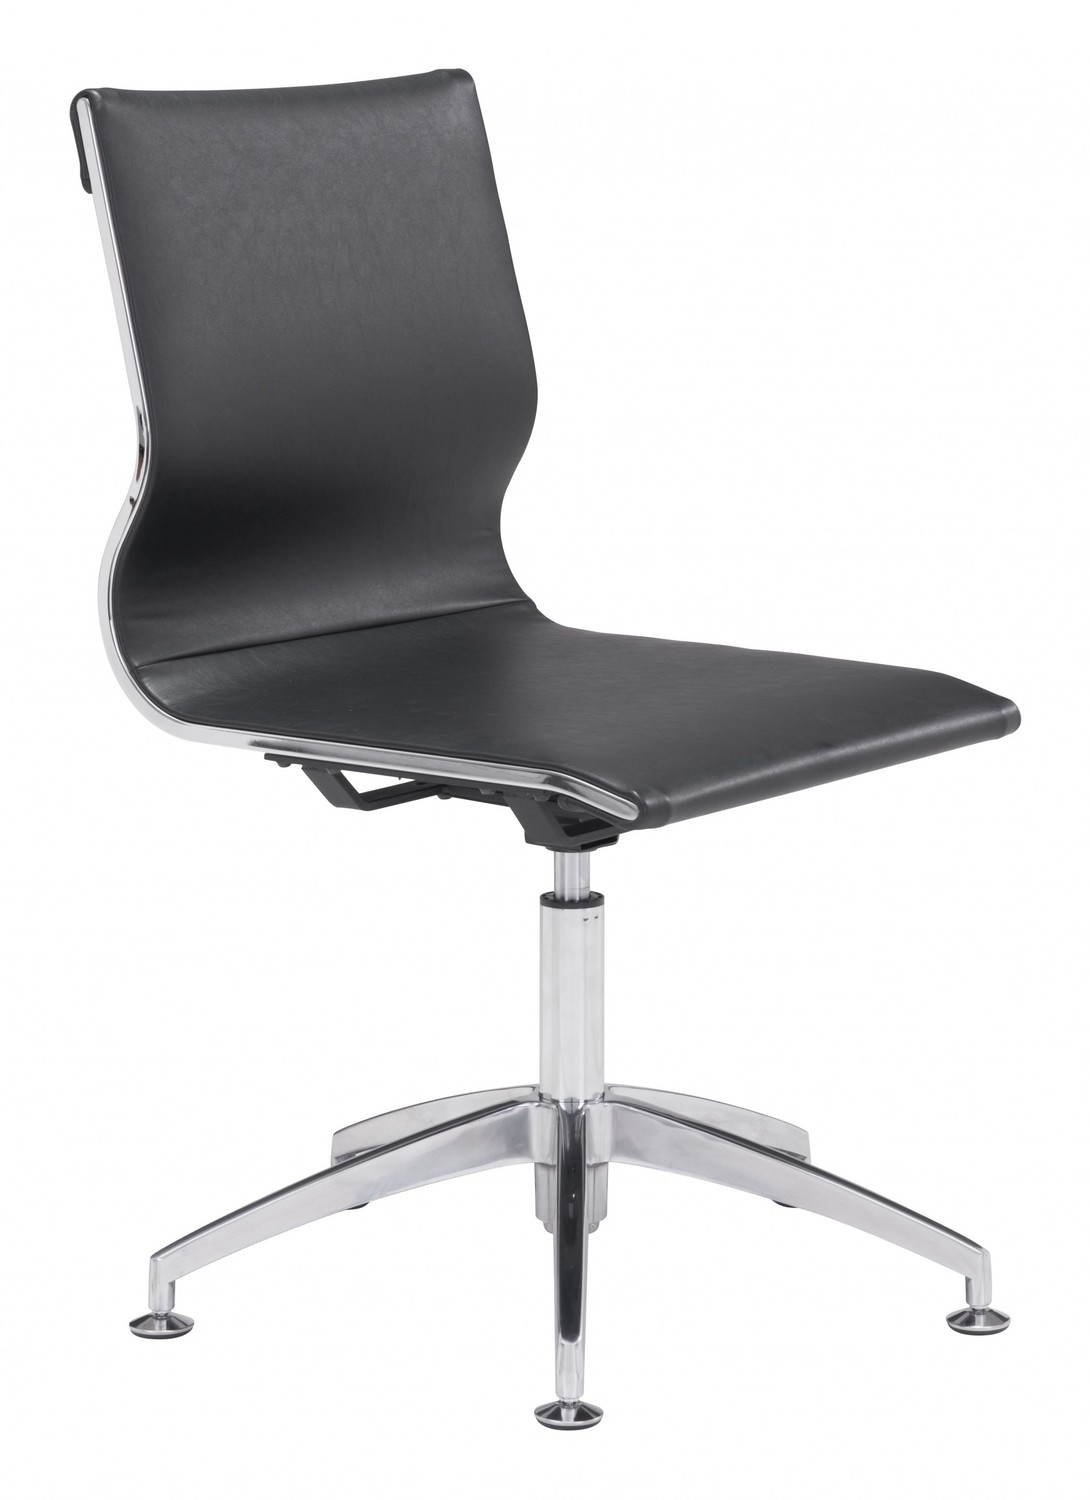 Black Ergonomic Conference Room Office Chair